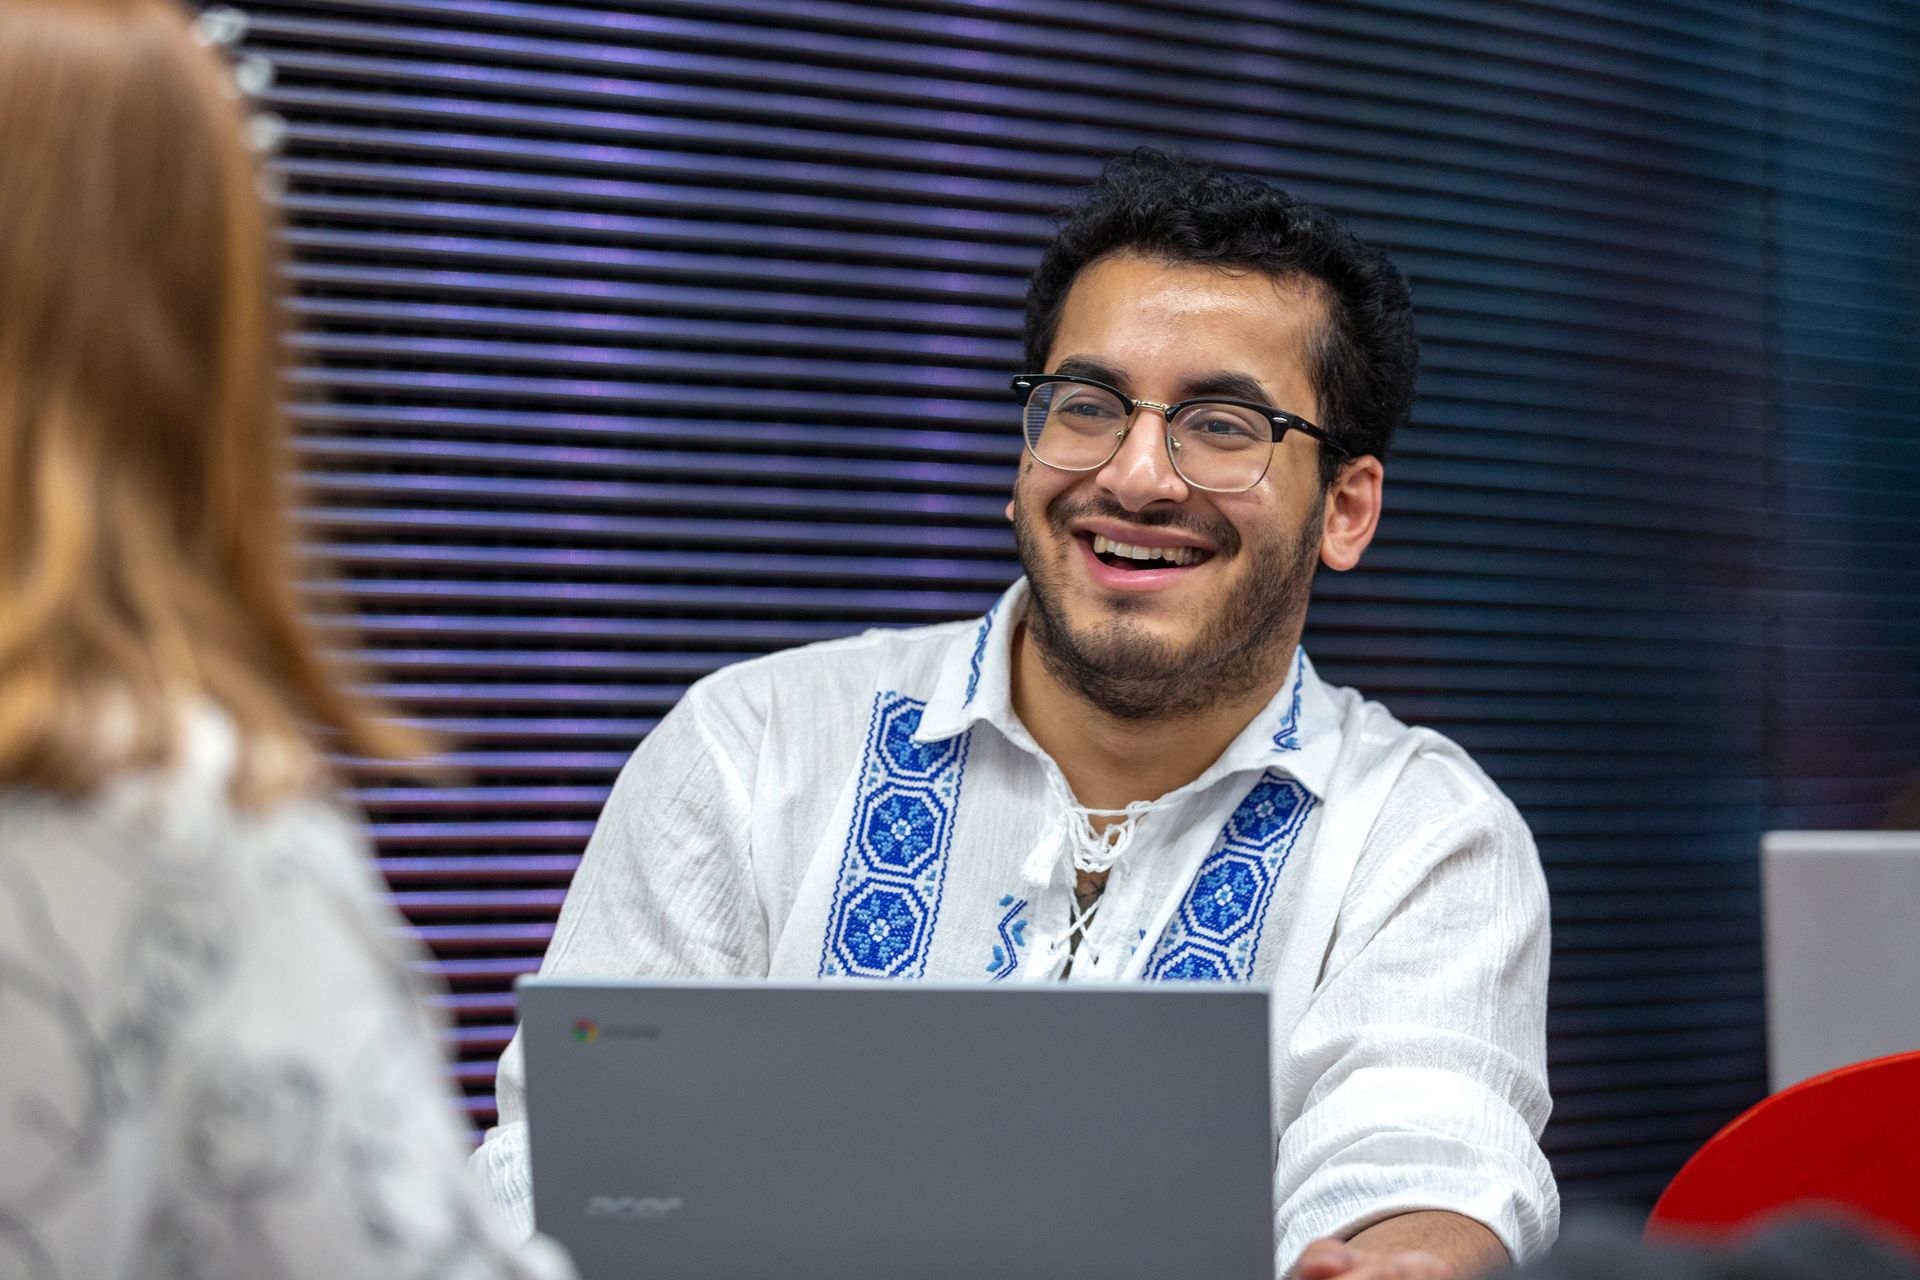 Medicine student, Mohammed, smiles while looking at a laptop